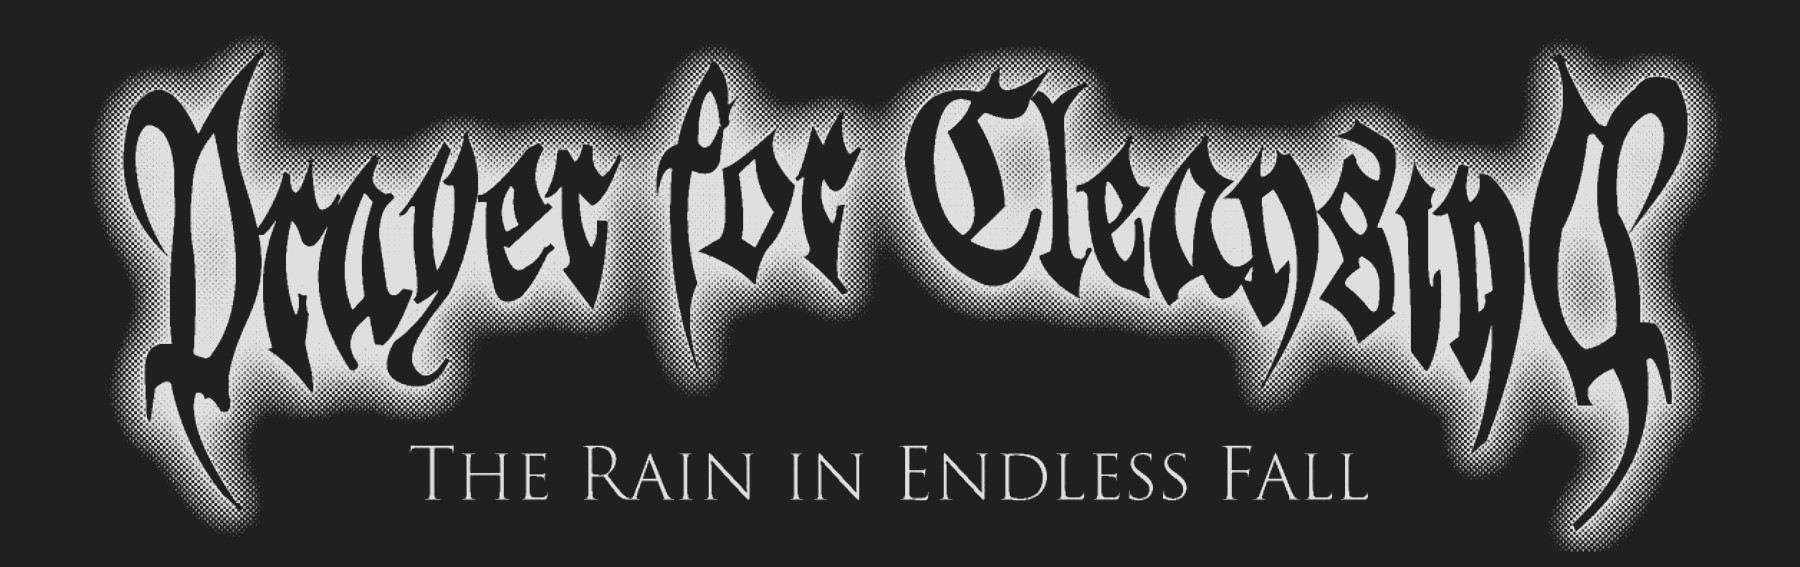 Prayer For Cleansing - The Rain In Endless Fal 8.5x2.75" sticker